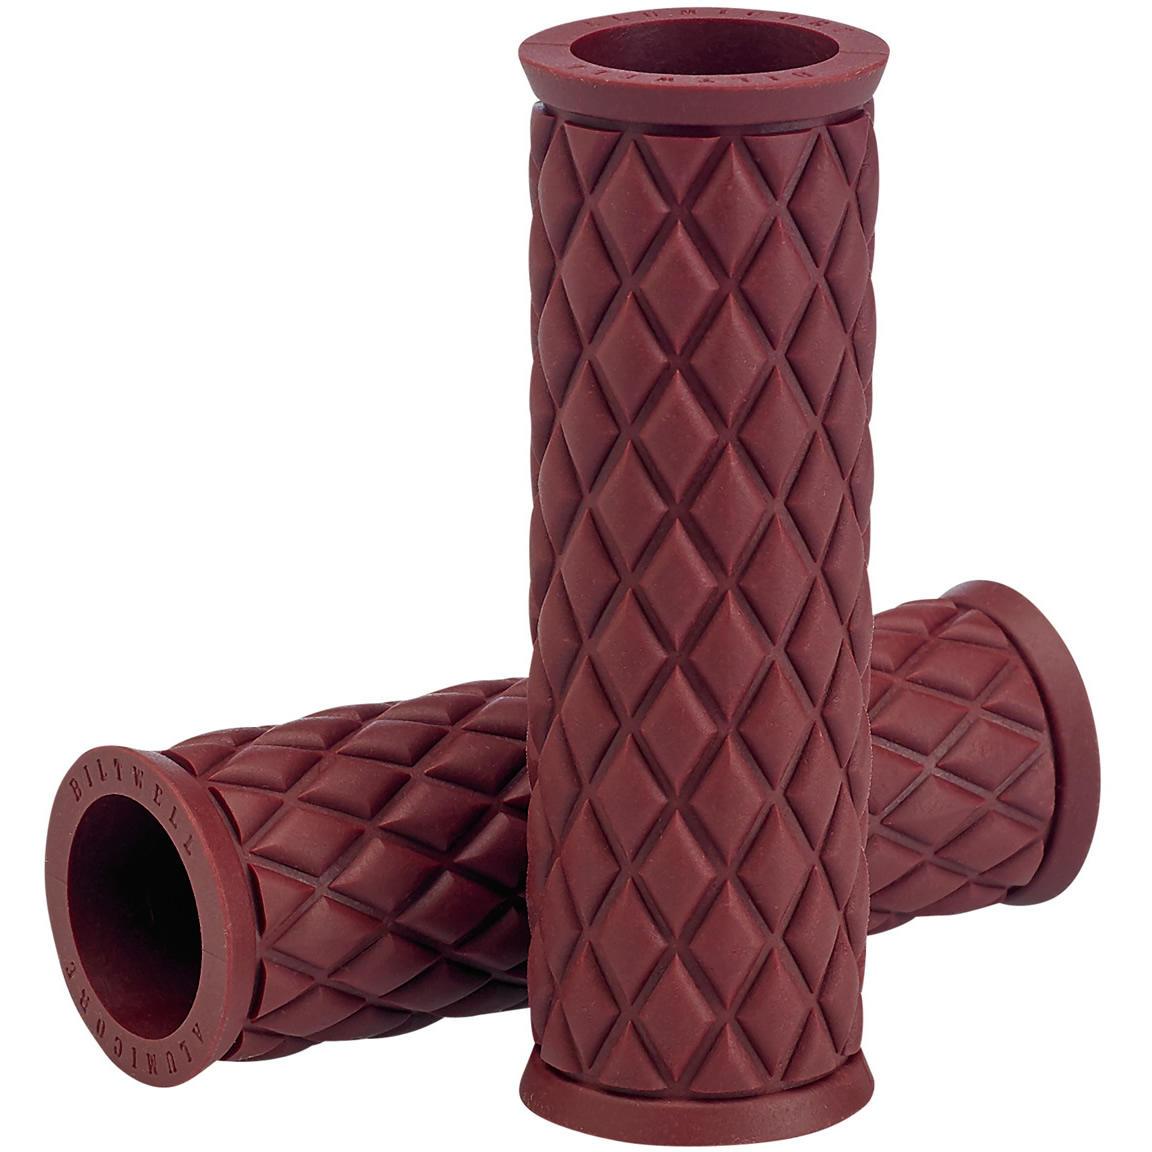 Biltwell Alumicore Replacement Sleeves Motorcycle Grips -Oxblood